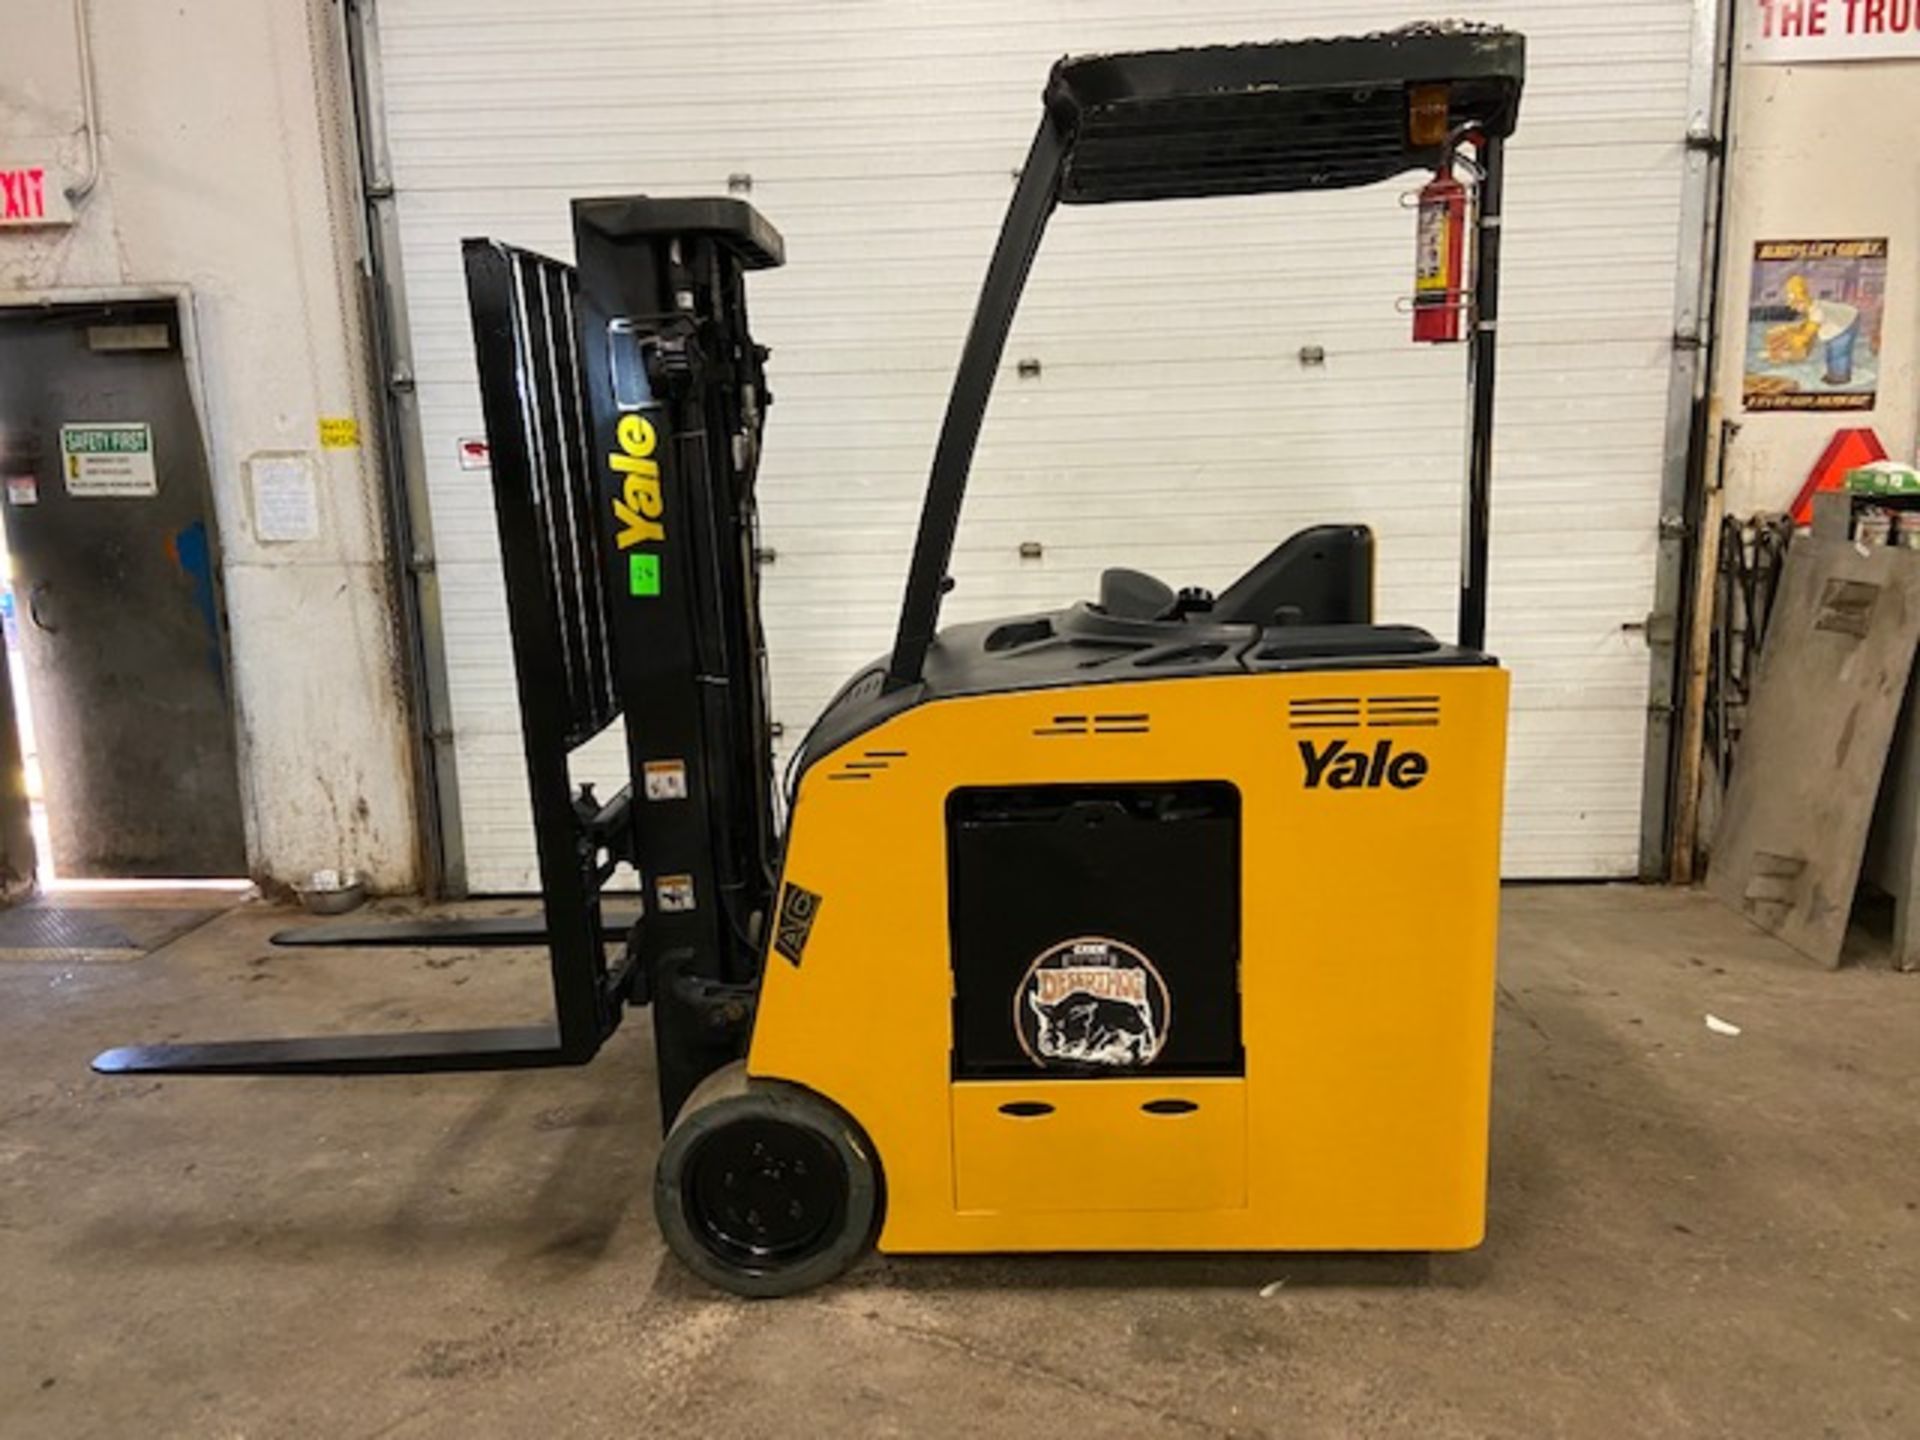 FREE CUSTOMS - 2013 YALE 4000lbs Capacity Stand On Forklift Electric with sideshift and 3 stage